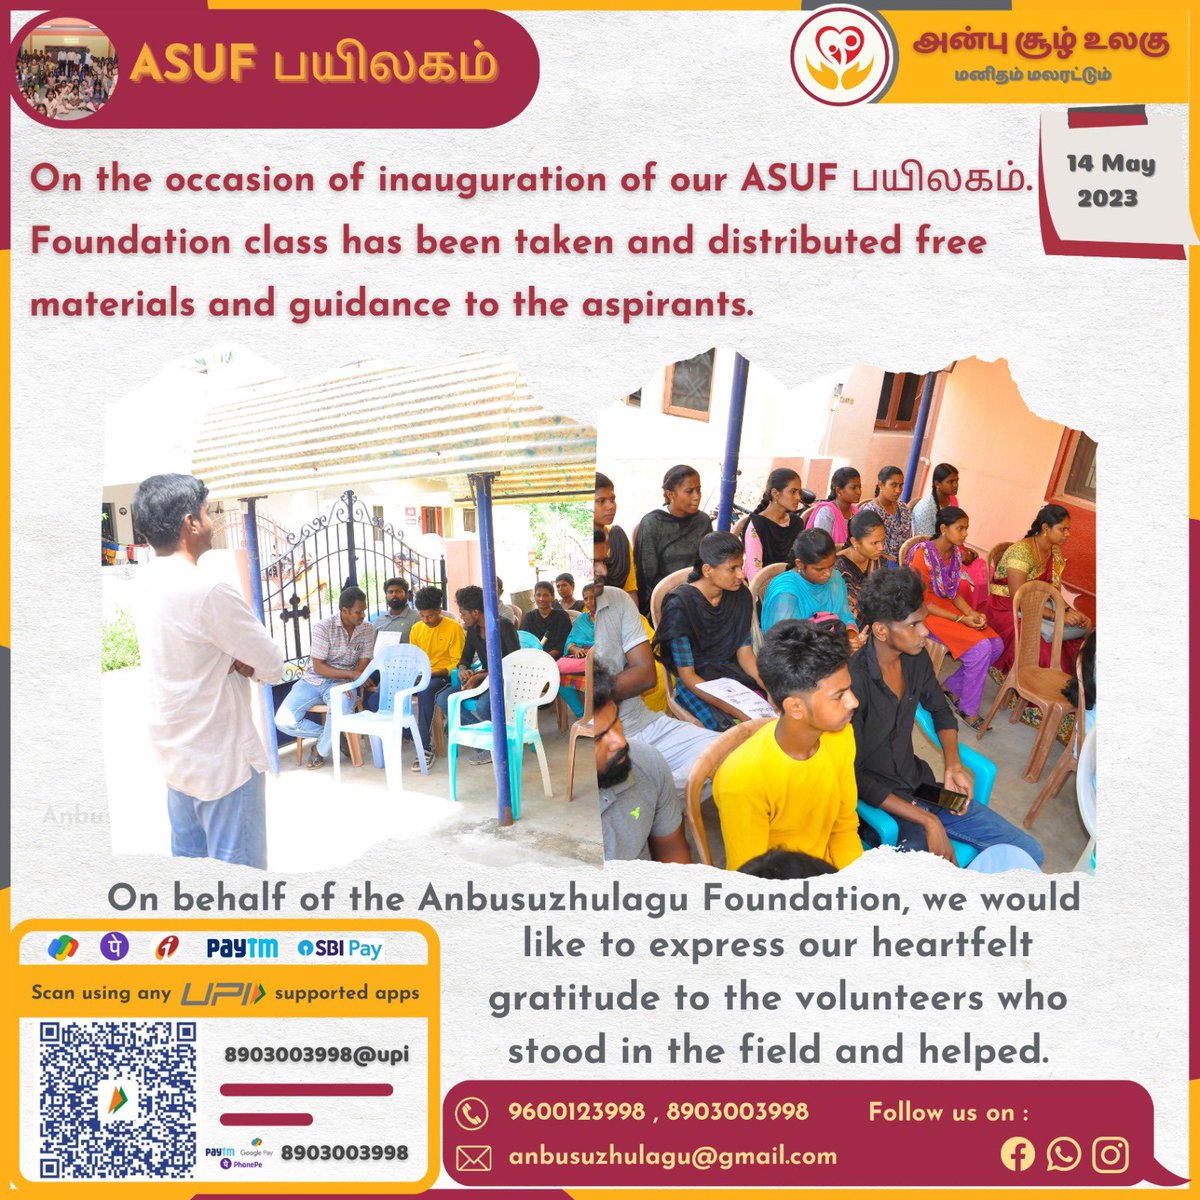 ASUF பயிலகம்

On the occasion of inauguration of our ASUF பயிலகம். Foundation class has been taken and distributed free materials and guidance to the aspirants.

#anbusuzhulagu #asuf #anbusuzhulagu_thirumangalam #அன்புசூழ்உலகு #coaching #competativeexams